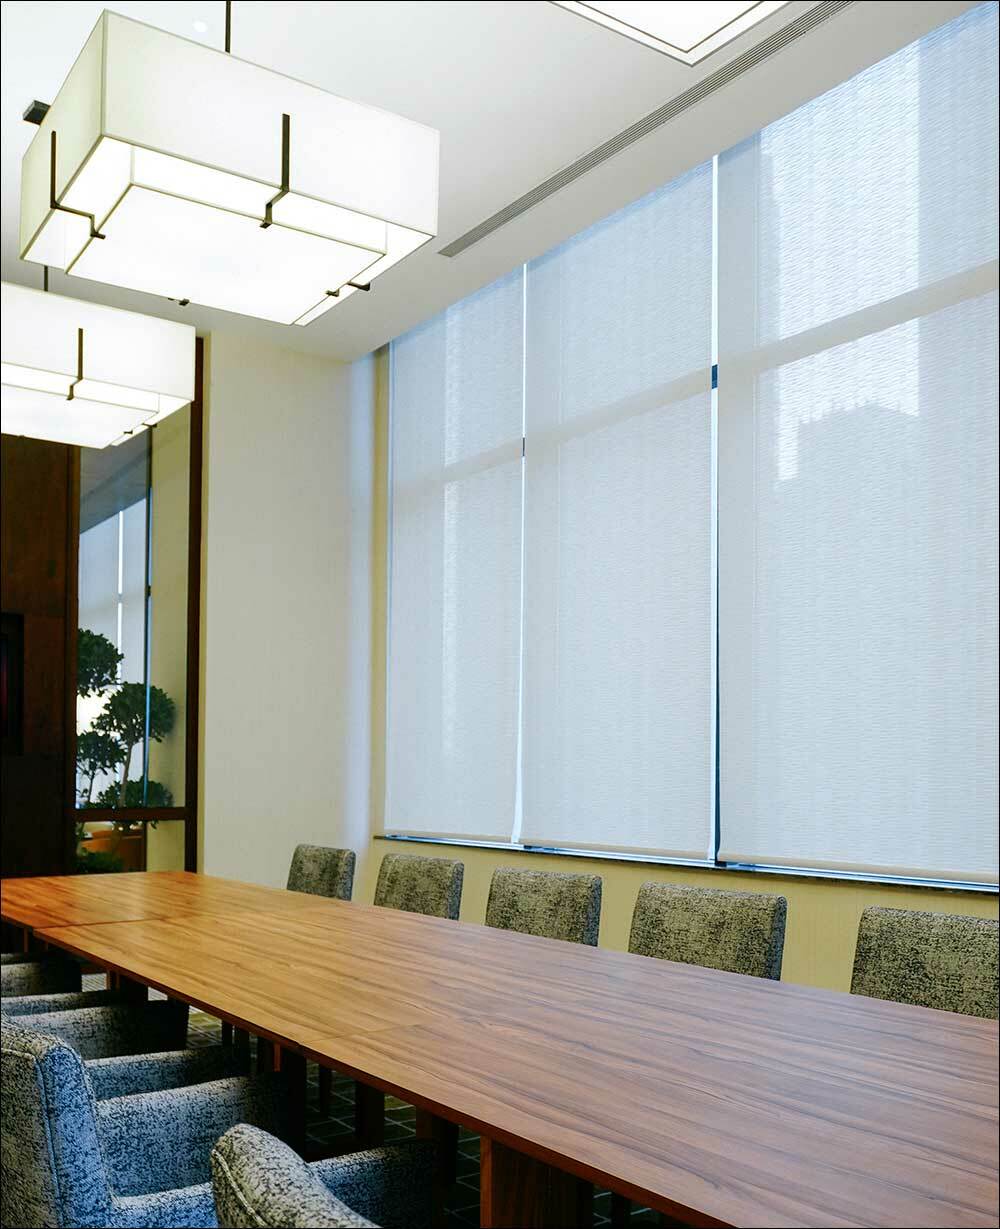 Our Brand Ox Maui Light Filtering Roller Shade